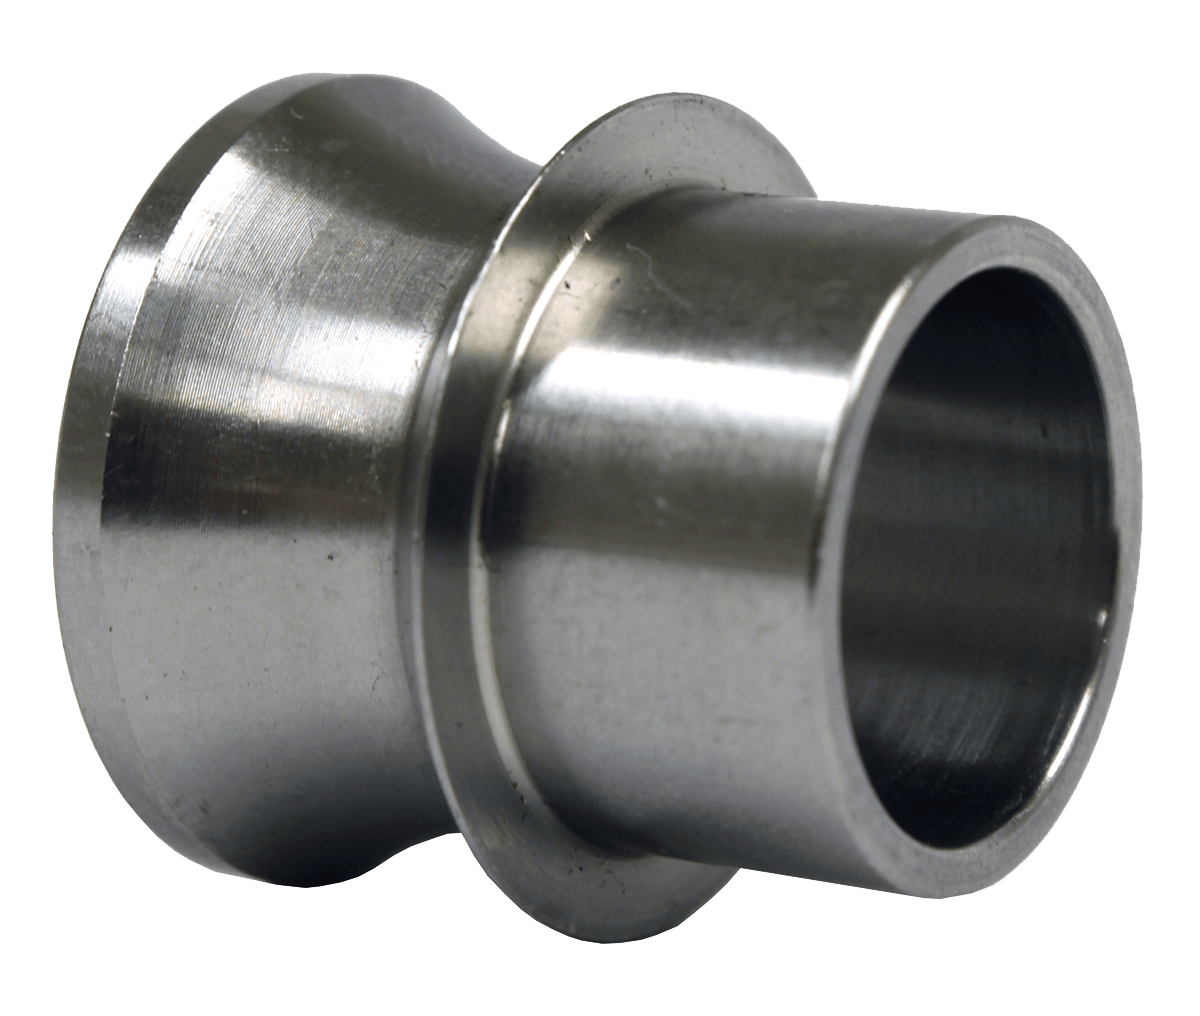 QA1 SN24-1017-H High Misalignment Spacer, 1.5 inch Od Ss, .625 inch X 3.5 inch Total Width